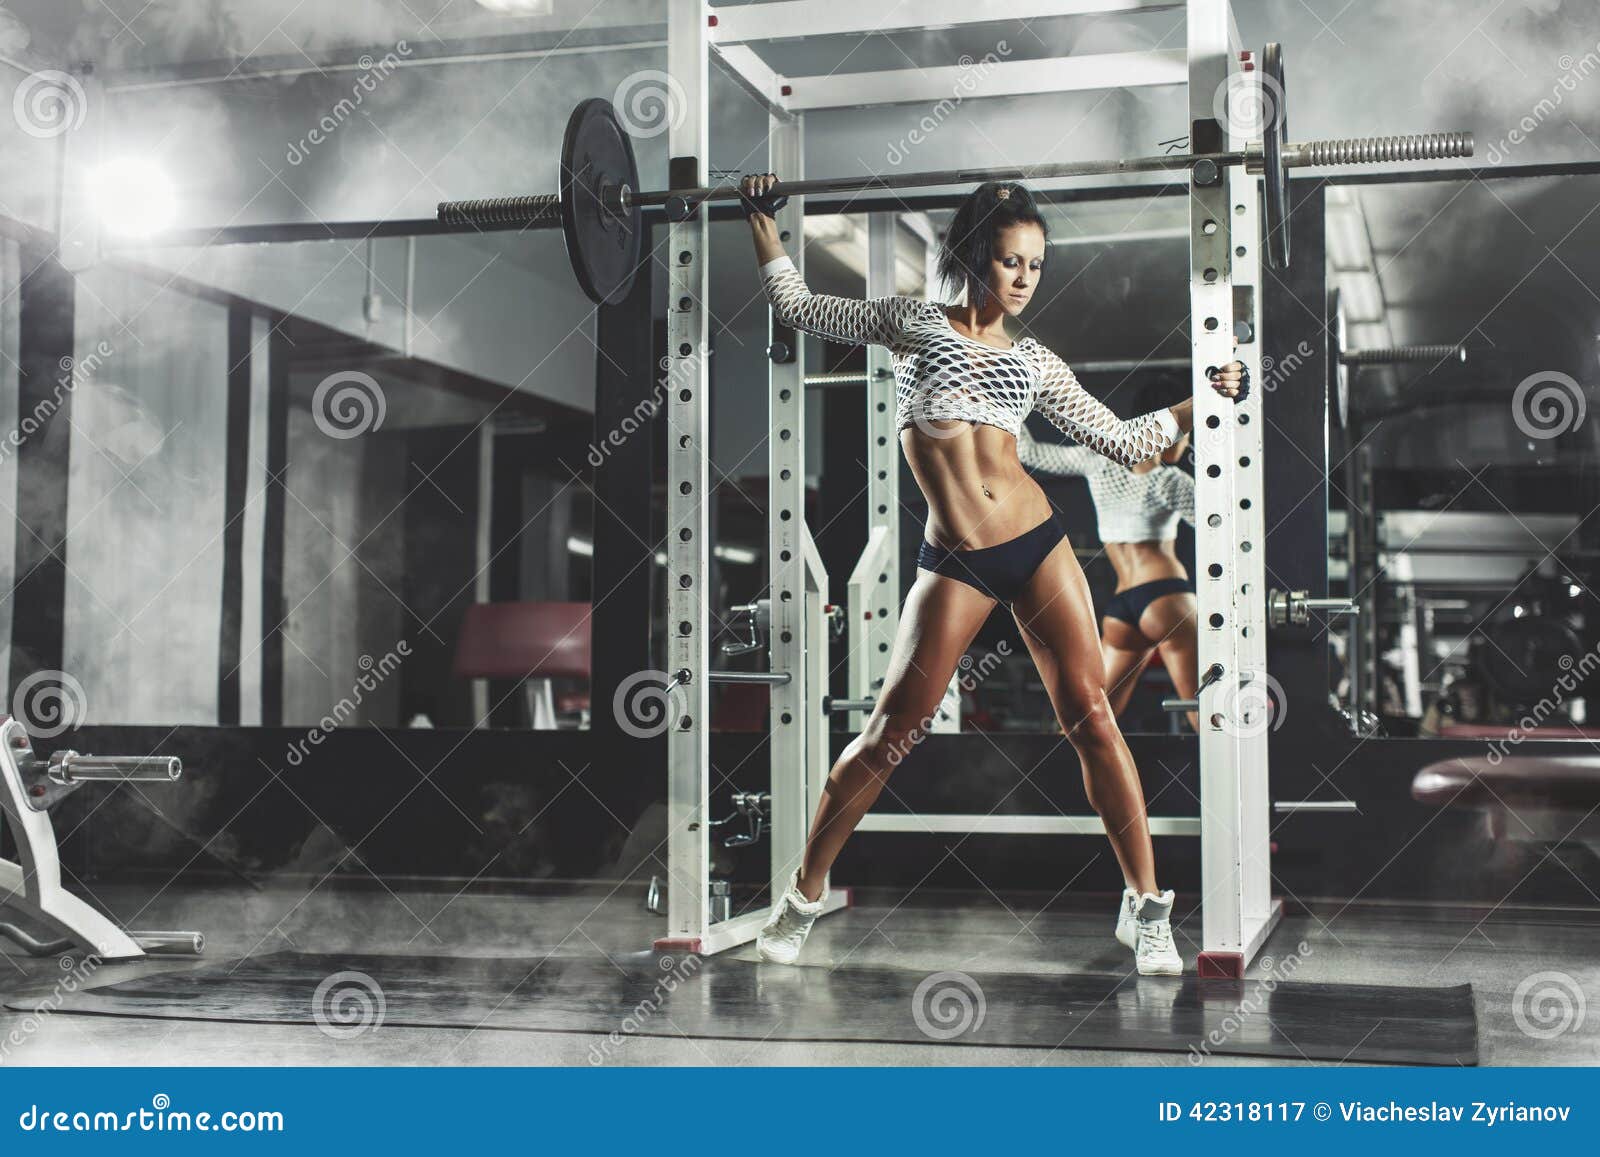 young sexy girl gym posing relaxing fitness smoke background 42318117